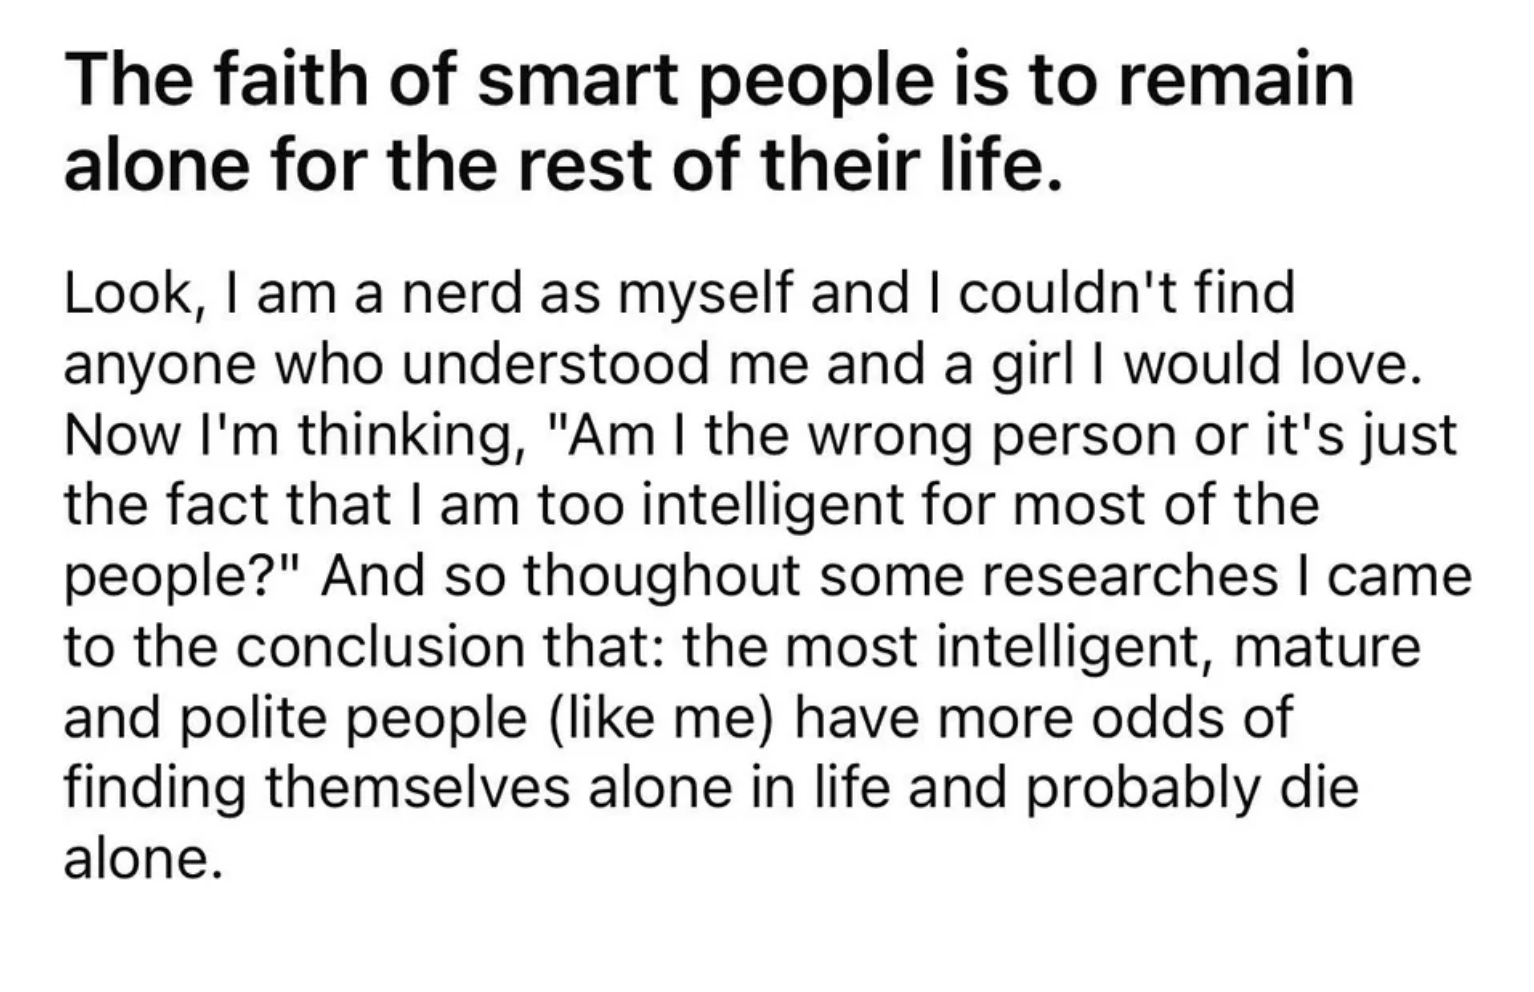 &quot;Am I the wrong person or it&#x27;s just the fact that I am too intelligent for most of the people?&quot;